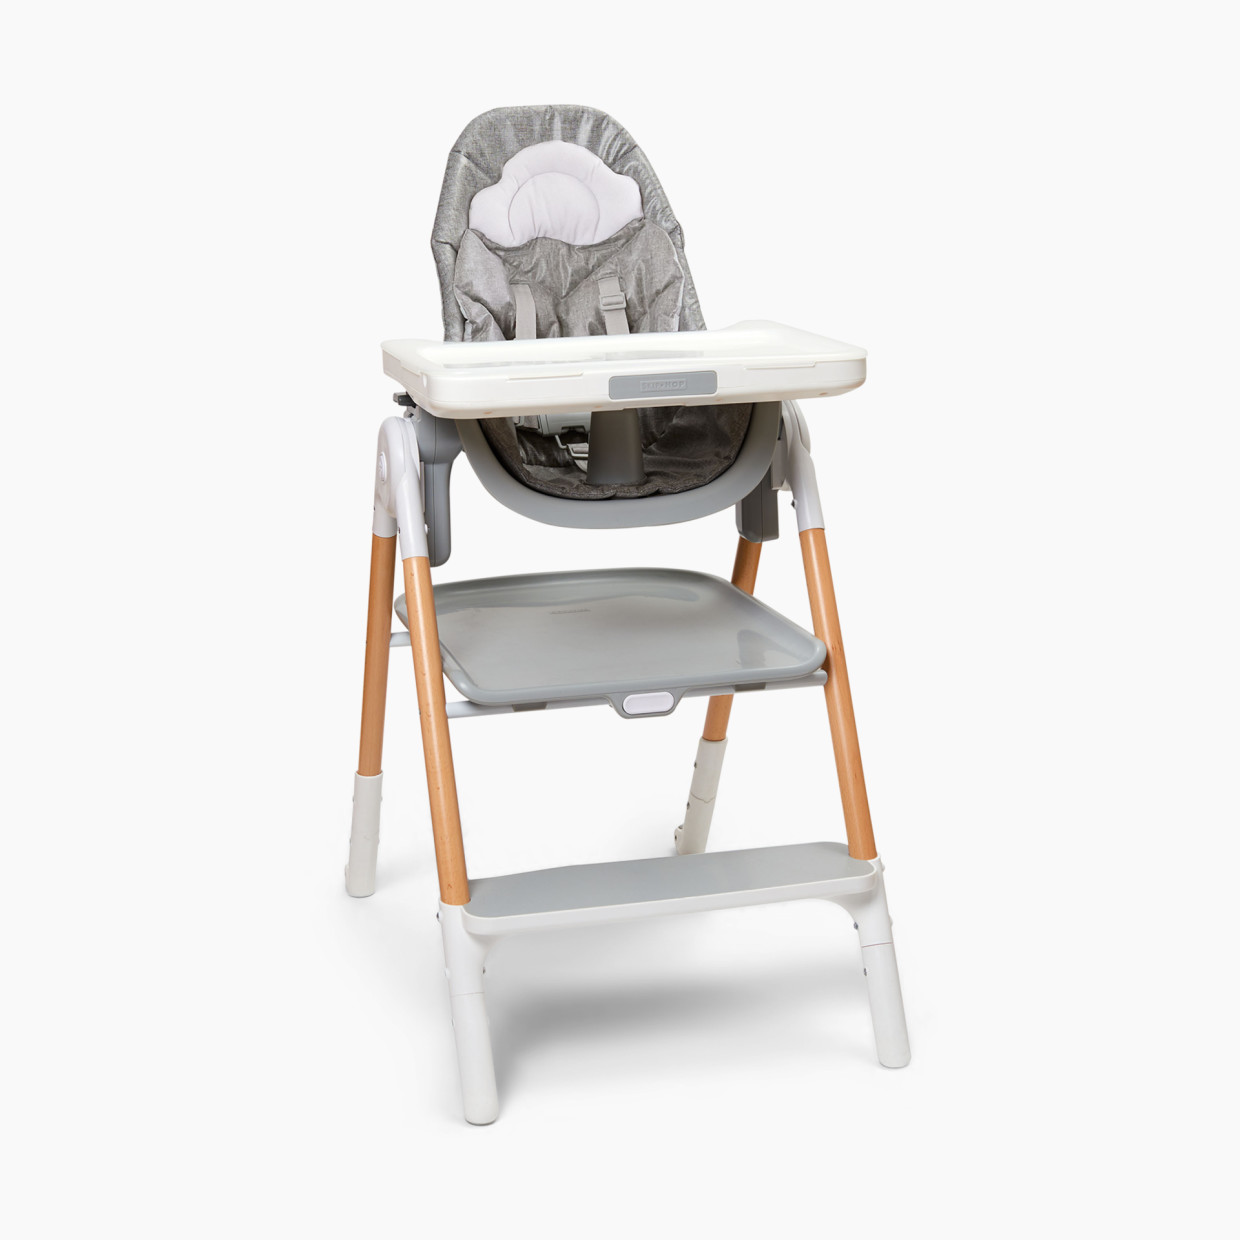  Skip Hop 2-in-1 Sit-up Activity Baby Chair, Silver